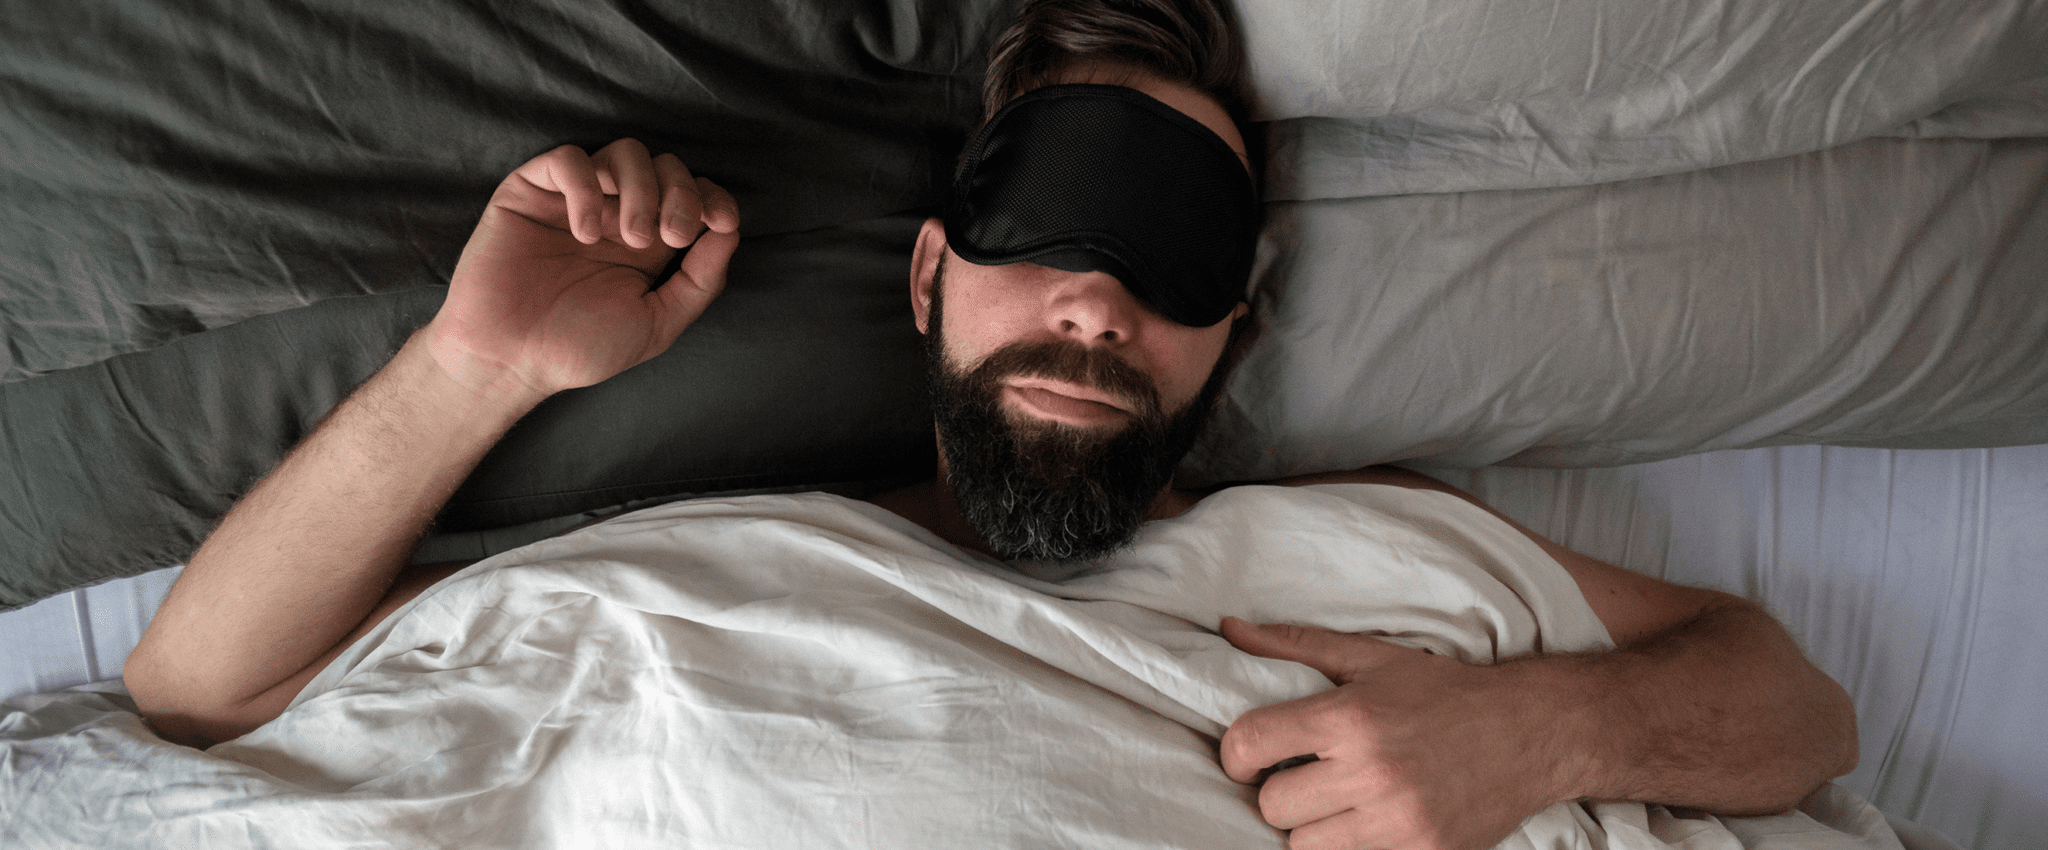 Take Your Sleep Quality to the Next Level With These 9 Weighted Sleep Masks